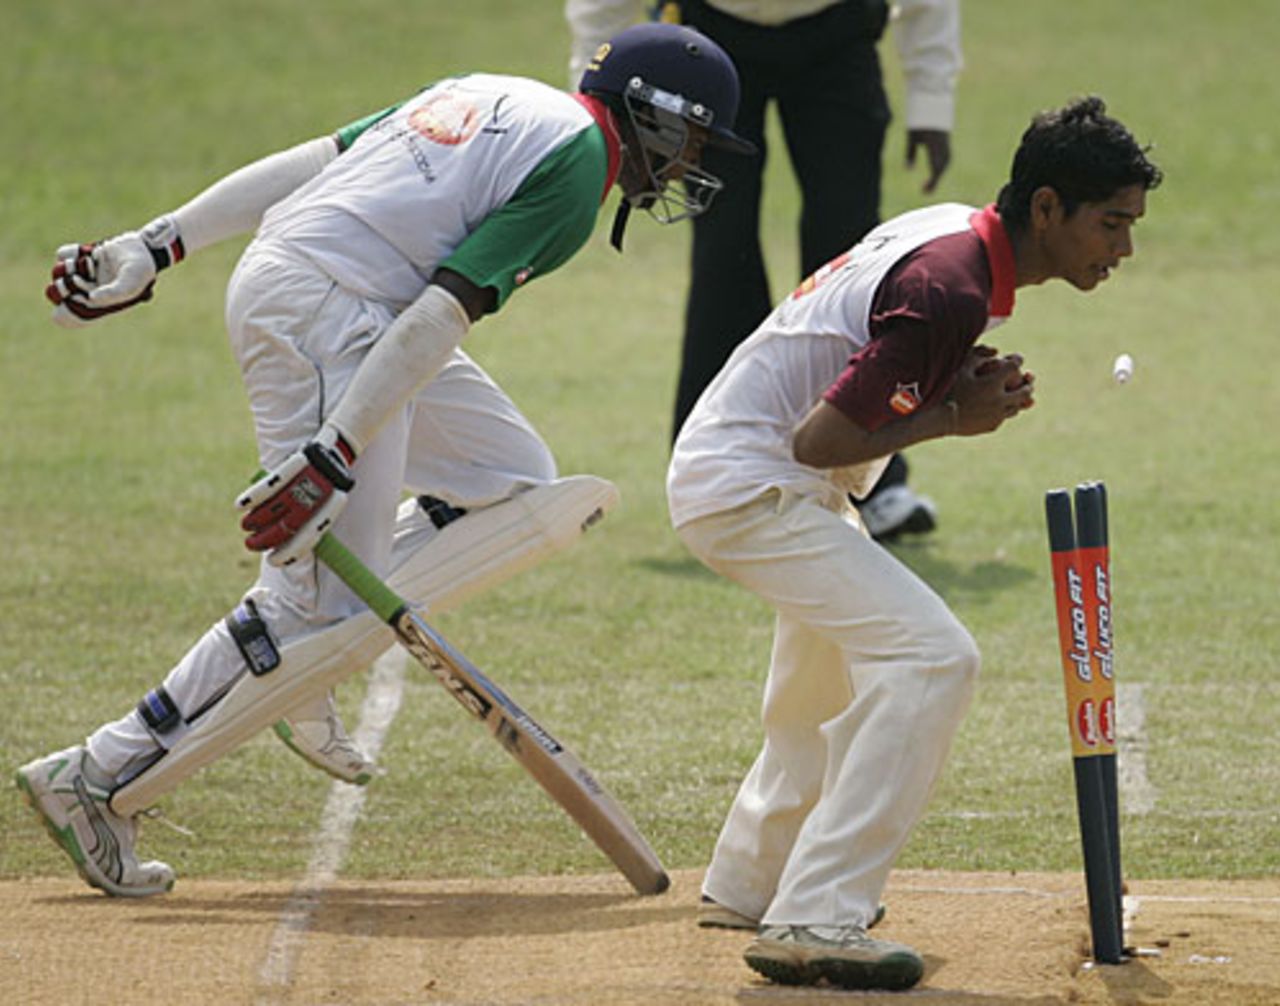 Prashan Wickremasinghe takes the bails off in a flash, Nalanda College v St Benedict's College, Glucofit Cricket Sixes, Colombo, October 18, 2009